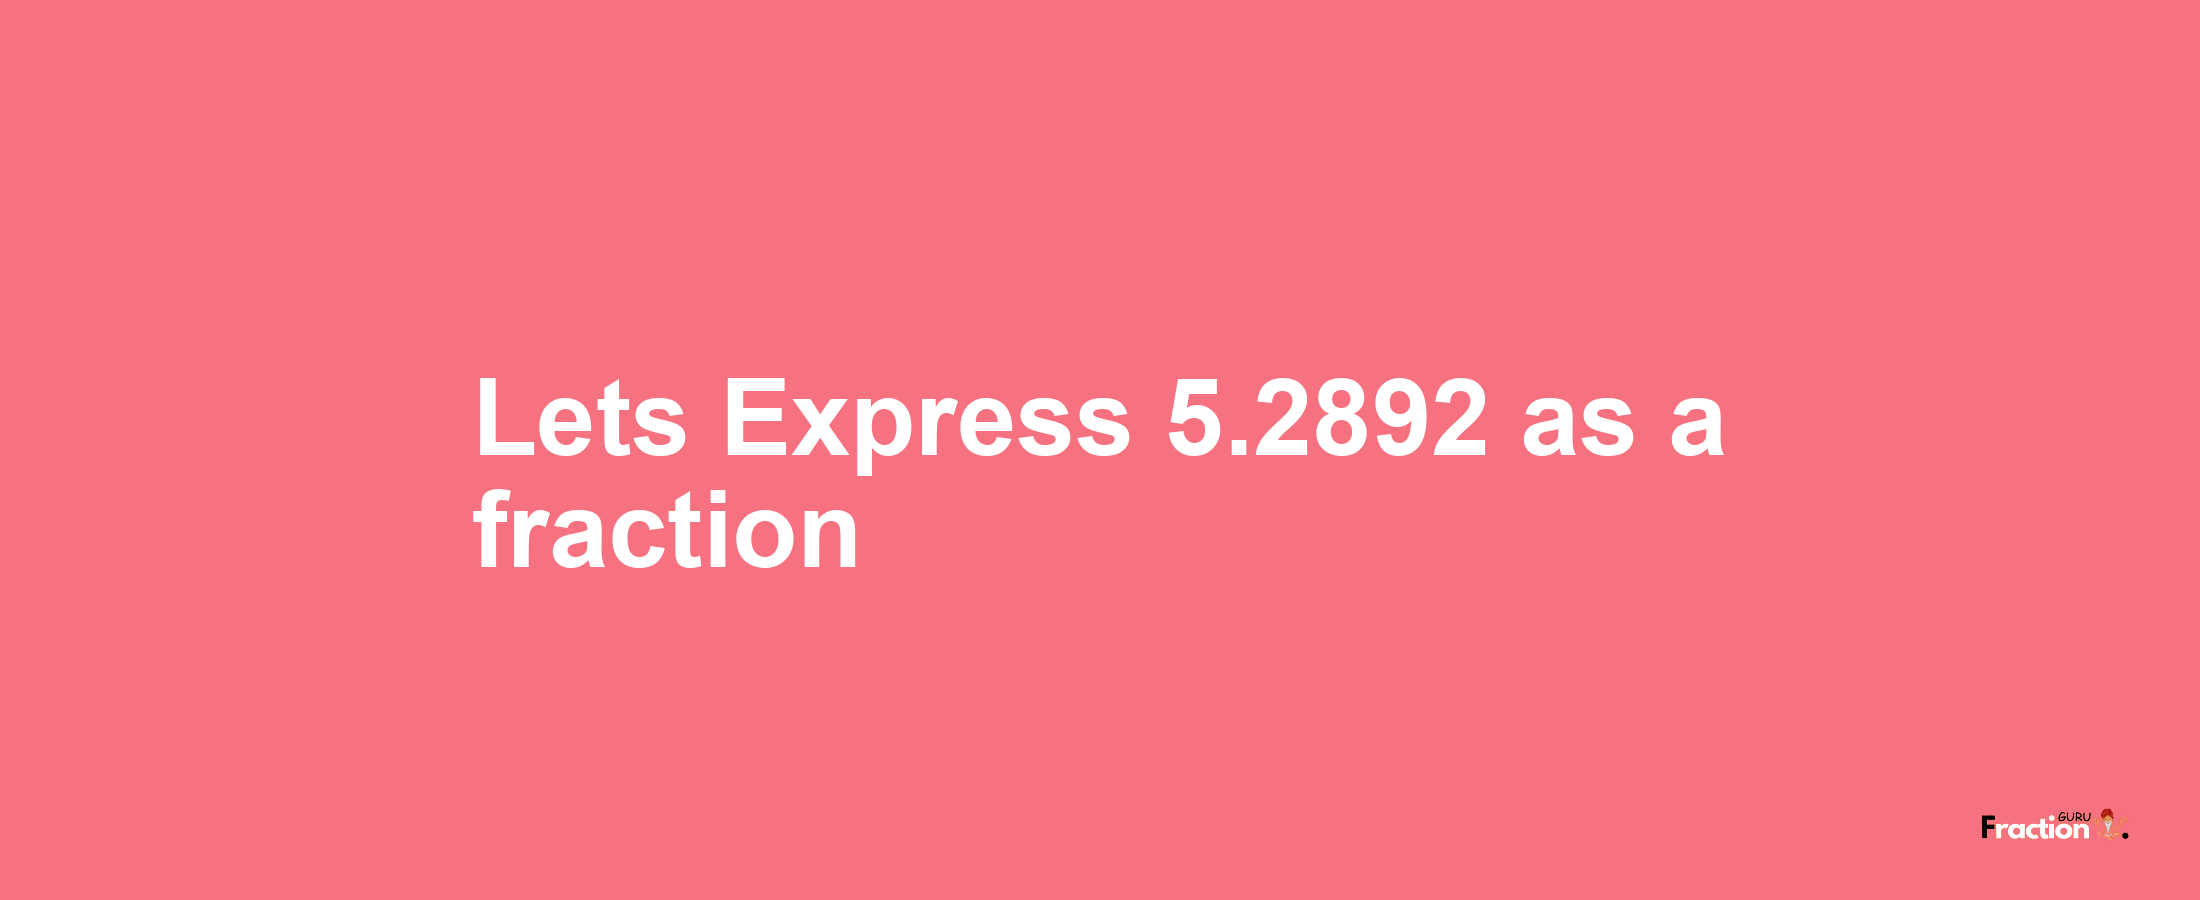 Lets Express 5.2892 as afraction